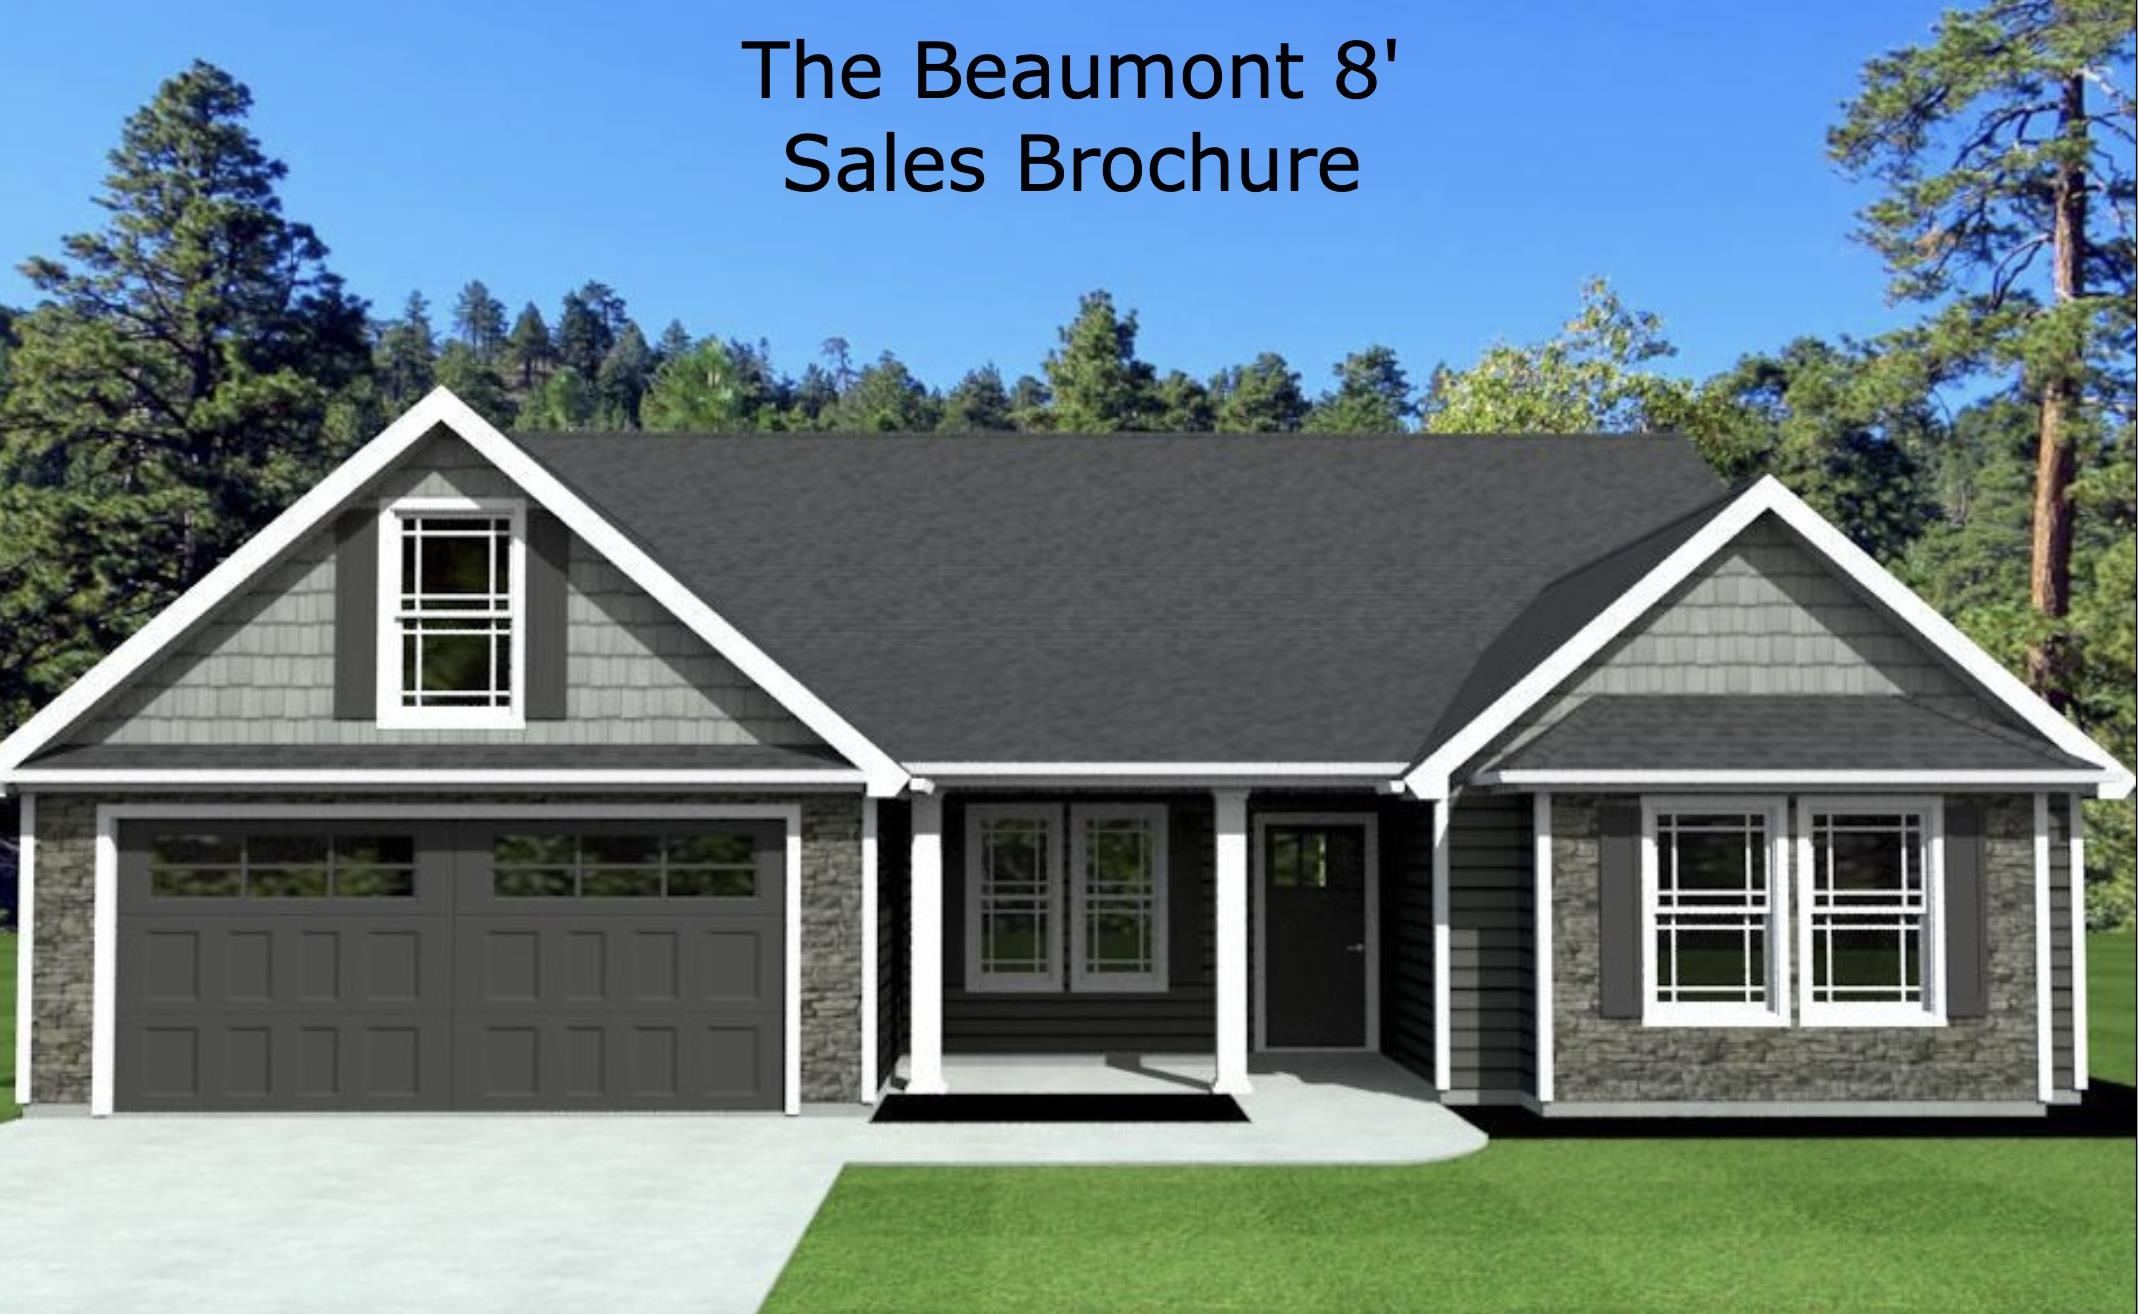 The Beaumont plan.  This plan offers a split bedroom, open concept layout with a spacious kitchen/dining that opens to a large living room with corner fireplace. His and her closet in master suite with double vanity, walk-in shower, and jetted tub! Complete with the builder's signature chair rail, crown molding and rope lighting! 12'x12' Covered Patio overlooking a 1/2 acre lot. Lot 2.